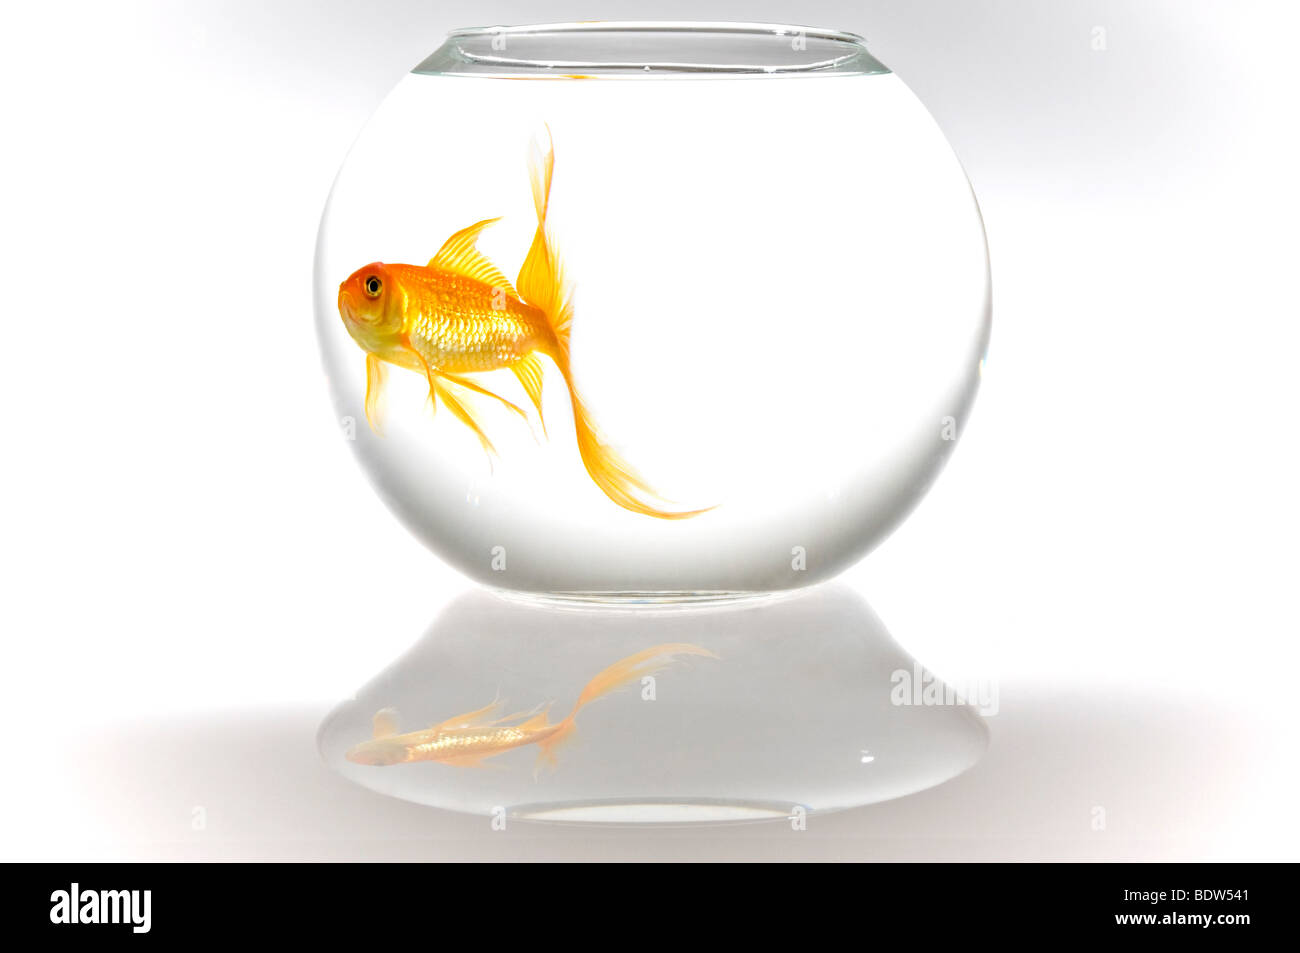 Horizontal close up of a bright orange goldfish (Carassius auratus) in a round fish bowl reflected on a white background. Stock Photo